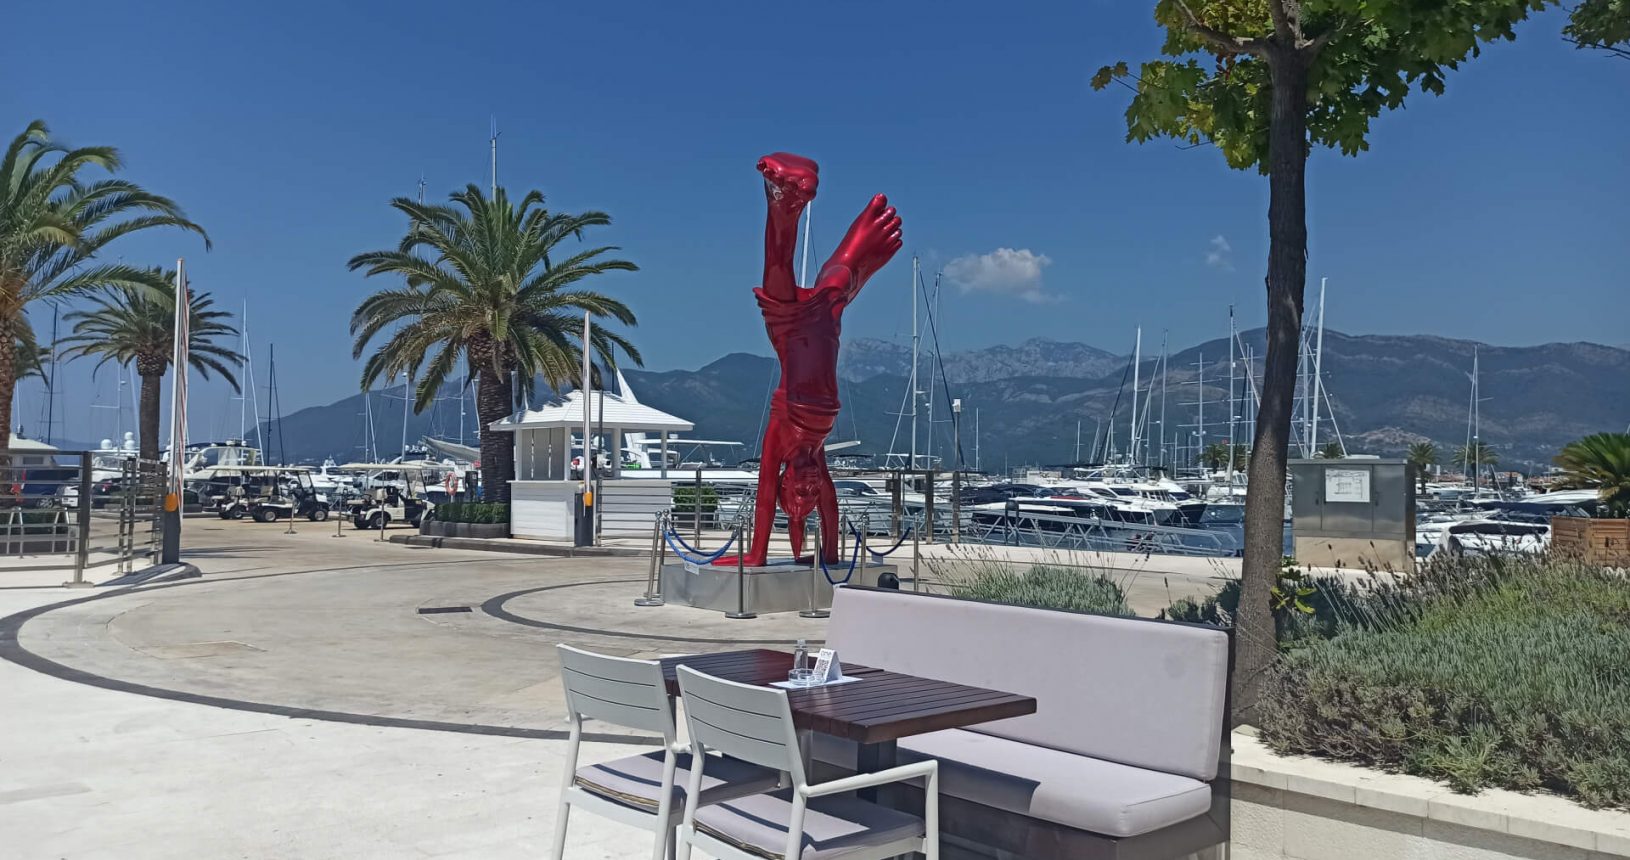 Summer sculpture 2 from behind the table in Porto Montenegro